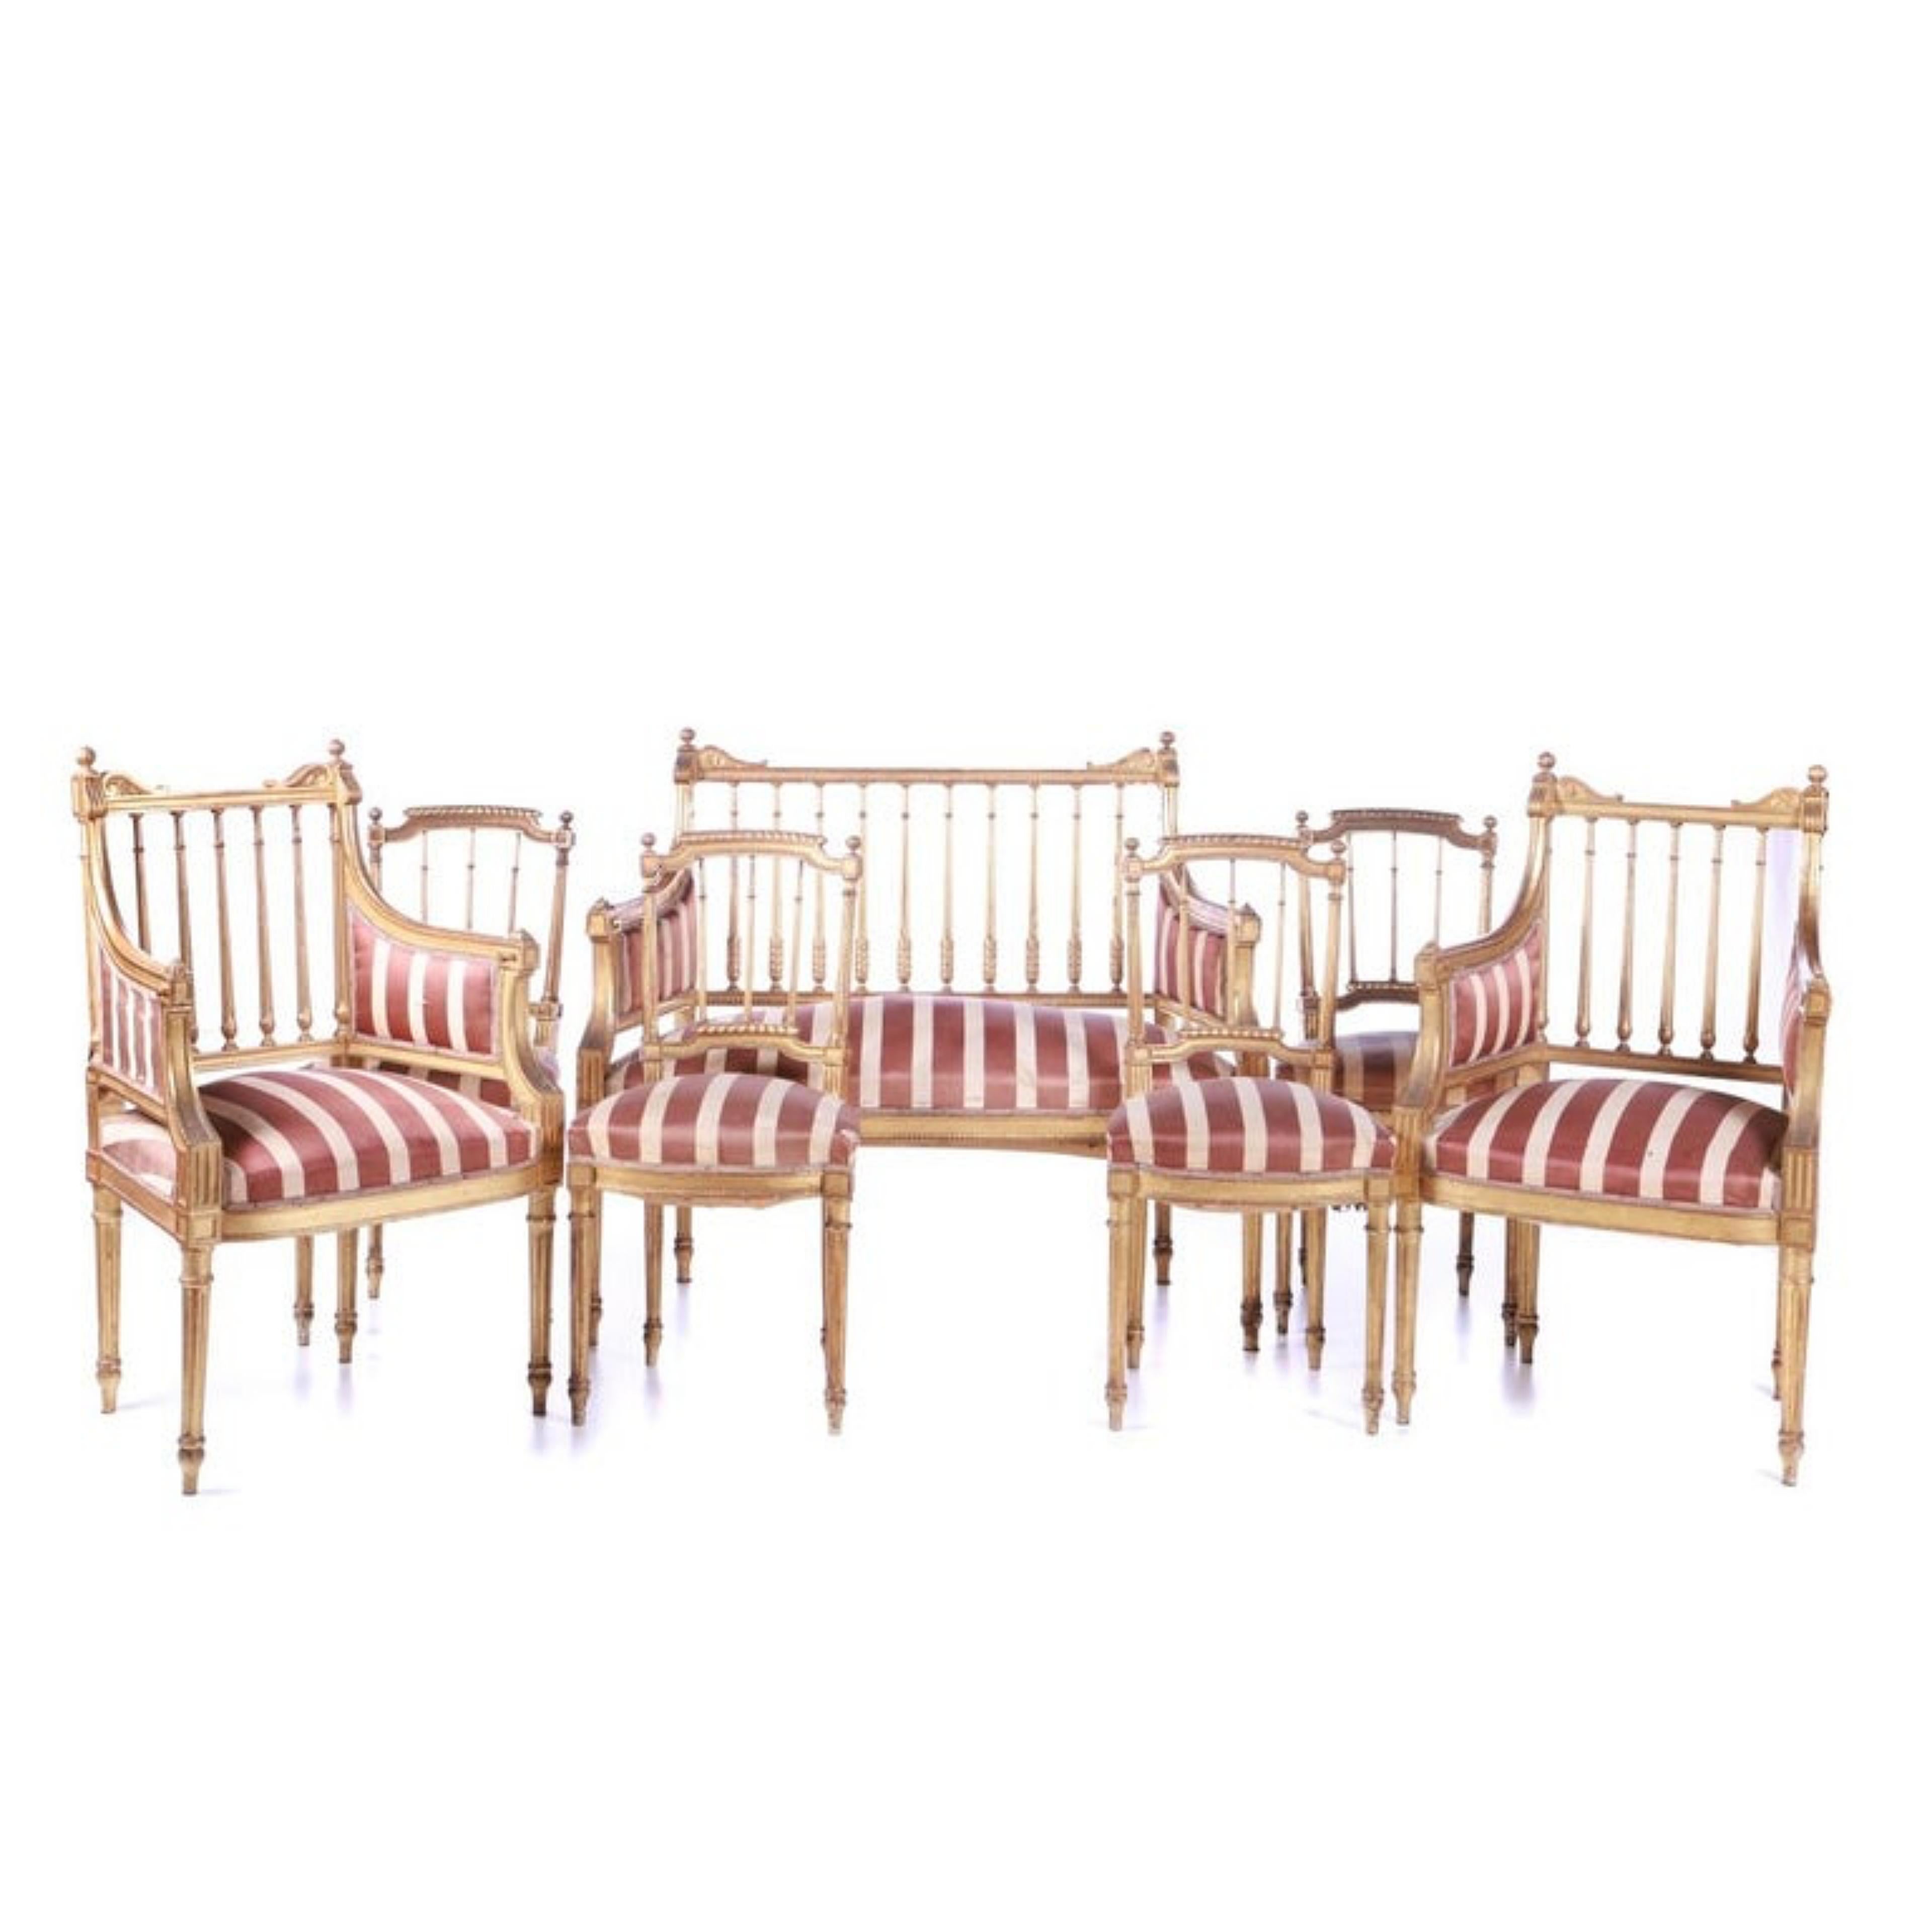 French canape set, 4 chairs and 2 armchairs.
Late 19th century, early 20th century.
in carved and gilded wood.
Upholstered seats.
Dim.: (armchair) 97 x 88 x 52 cm.
Good conditions.